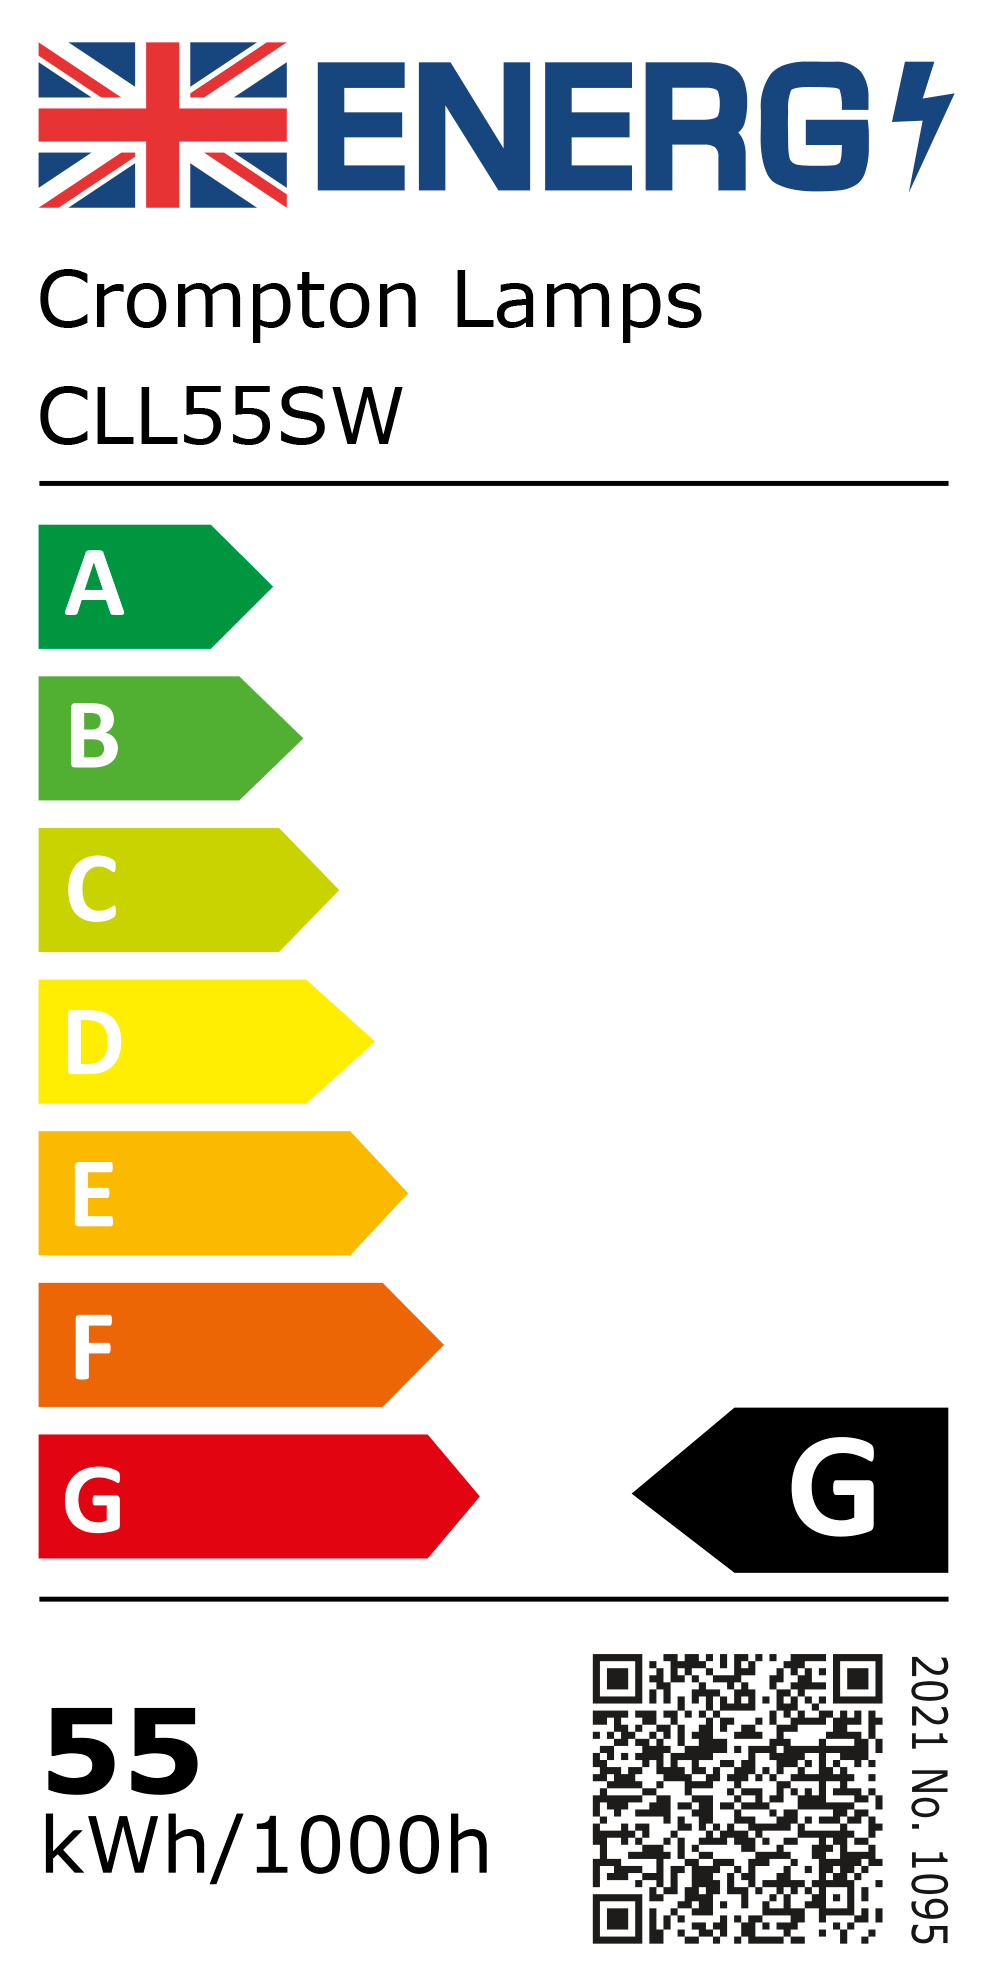 New 2021 Energy Rating Label: Stock Code CLL55SW